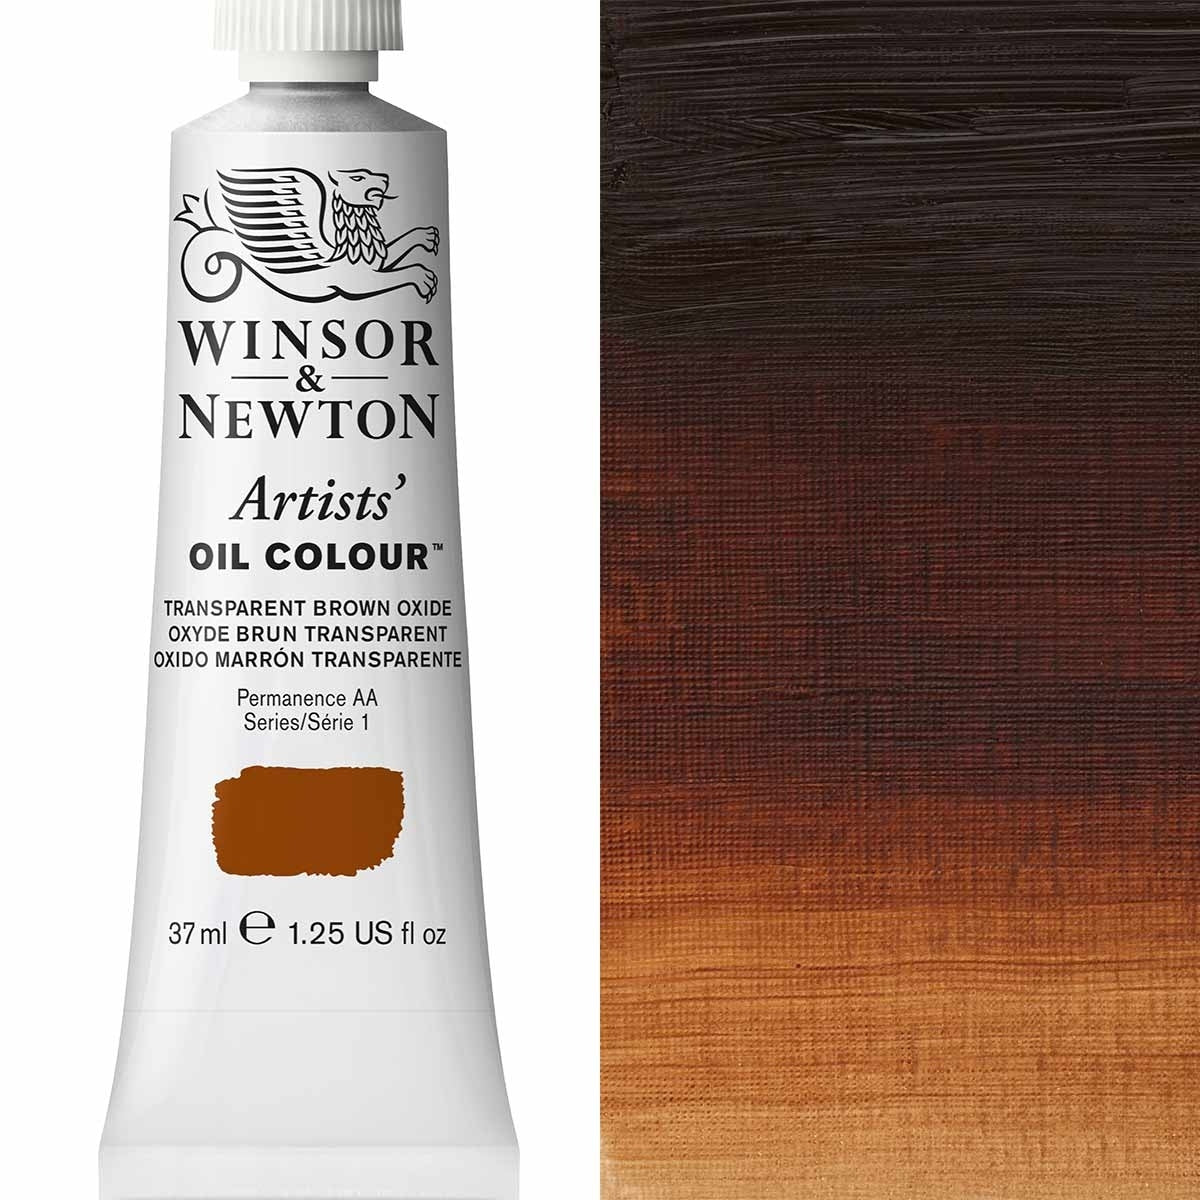 Winsor and Newton - Artists' Oil Colour - 37ml - Transparent Brown Oxide